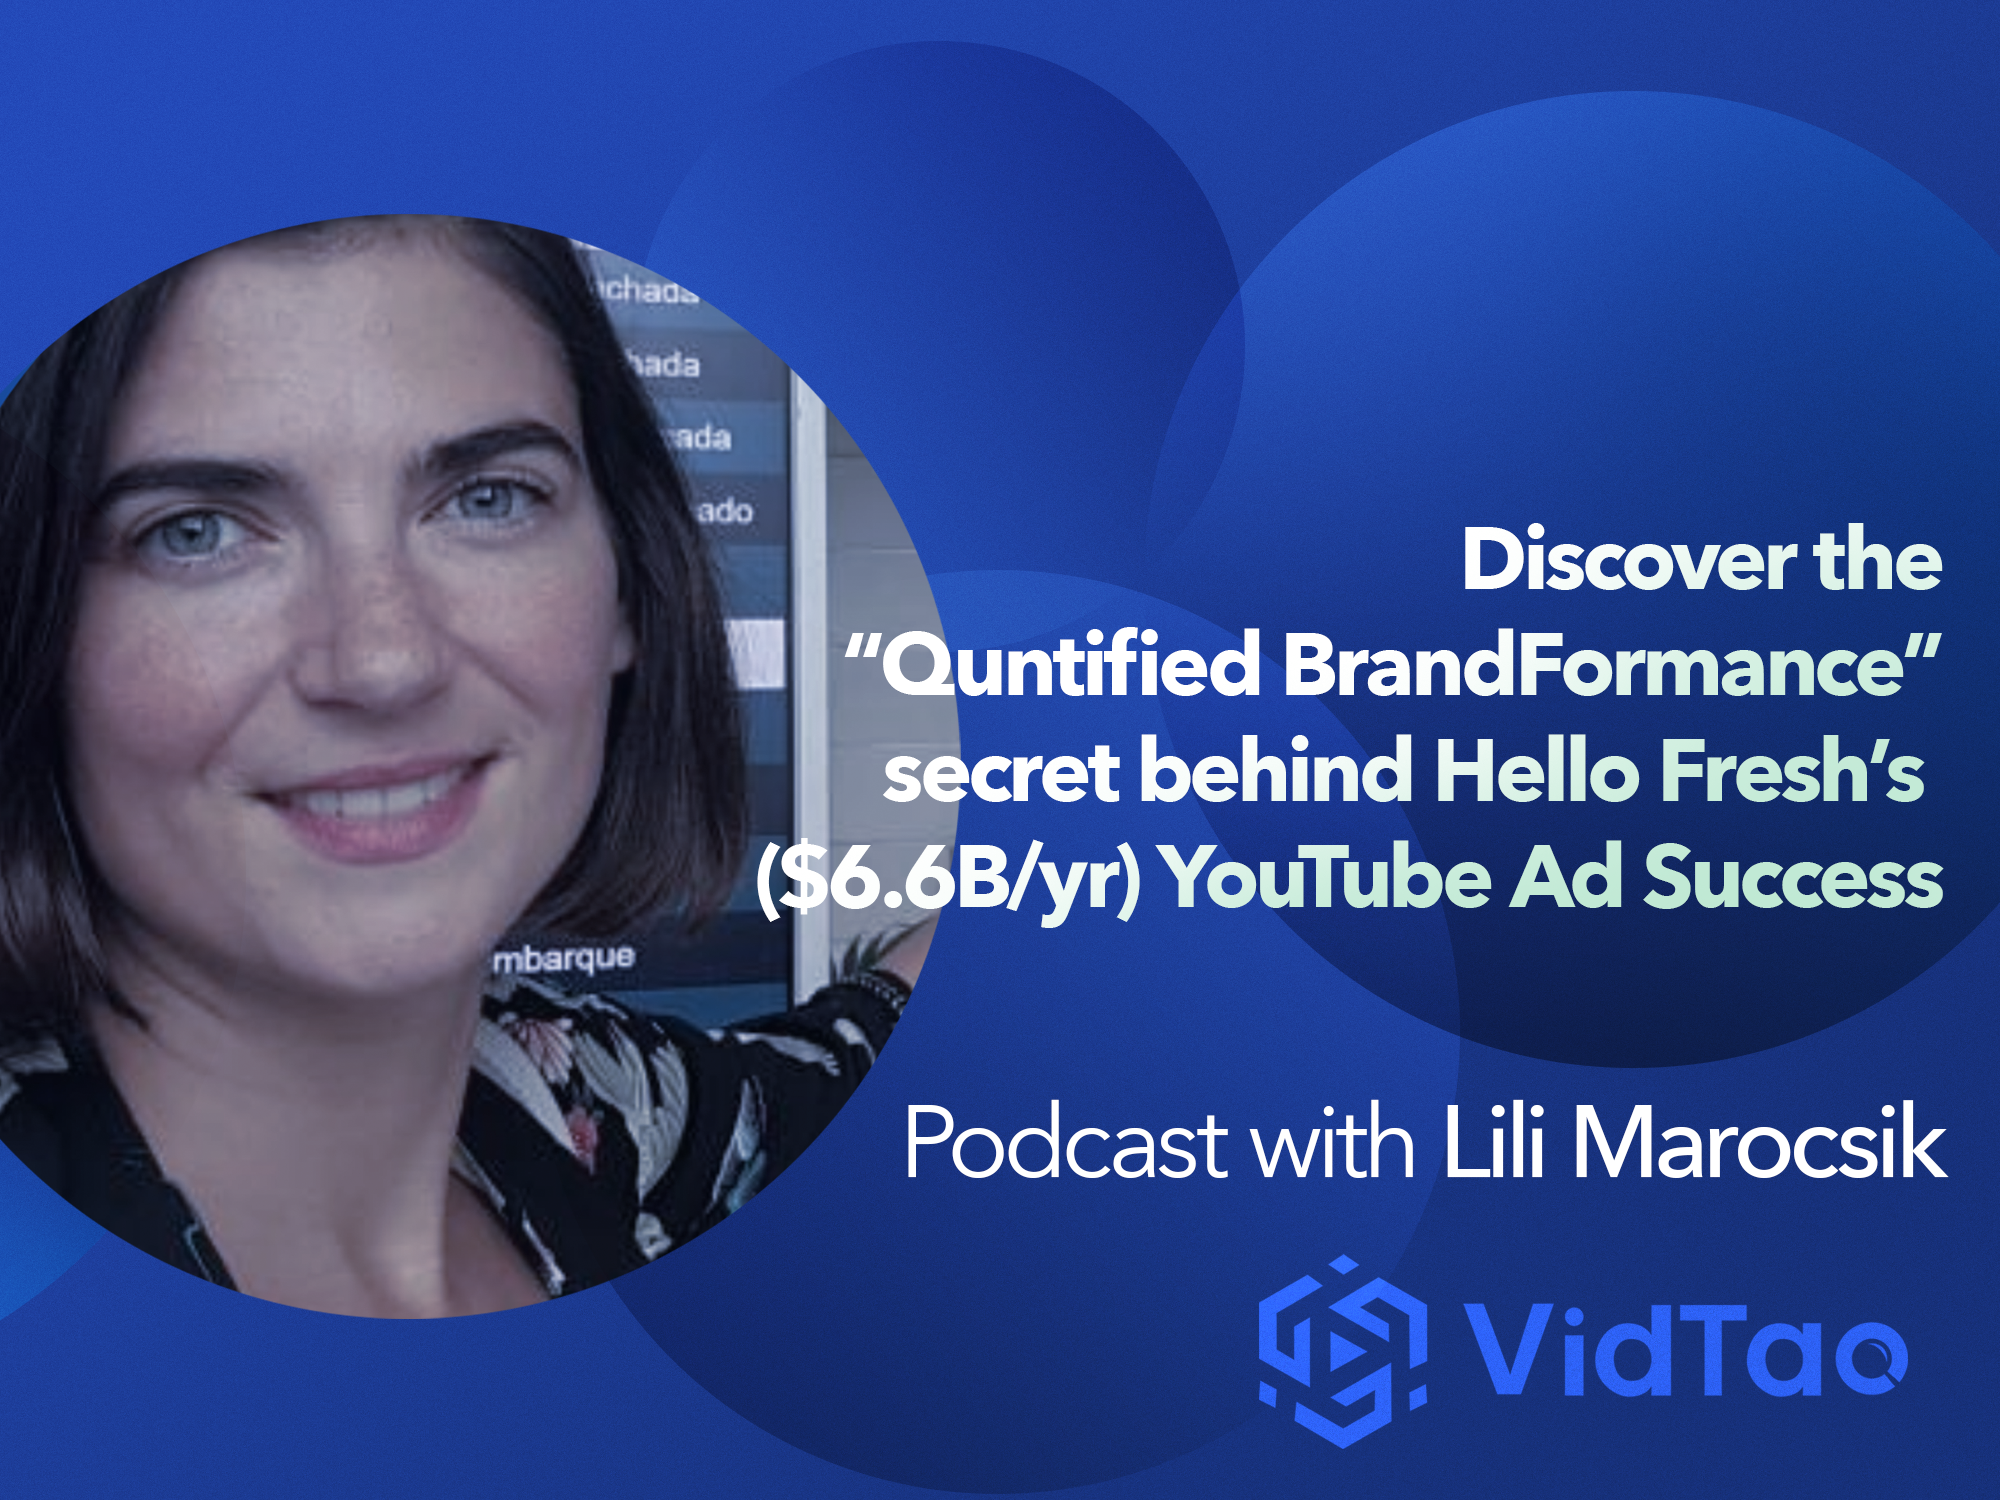 Discover The “Quantified BrandFormance” Secret Behind Hello Fresh’s ($6.6B/yr) YouTube Ad Success (Podcast with Lili Marocsik)